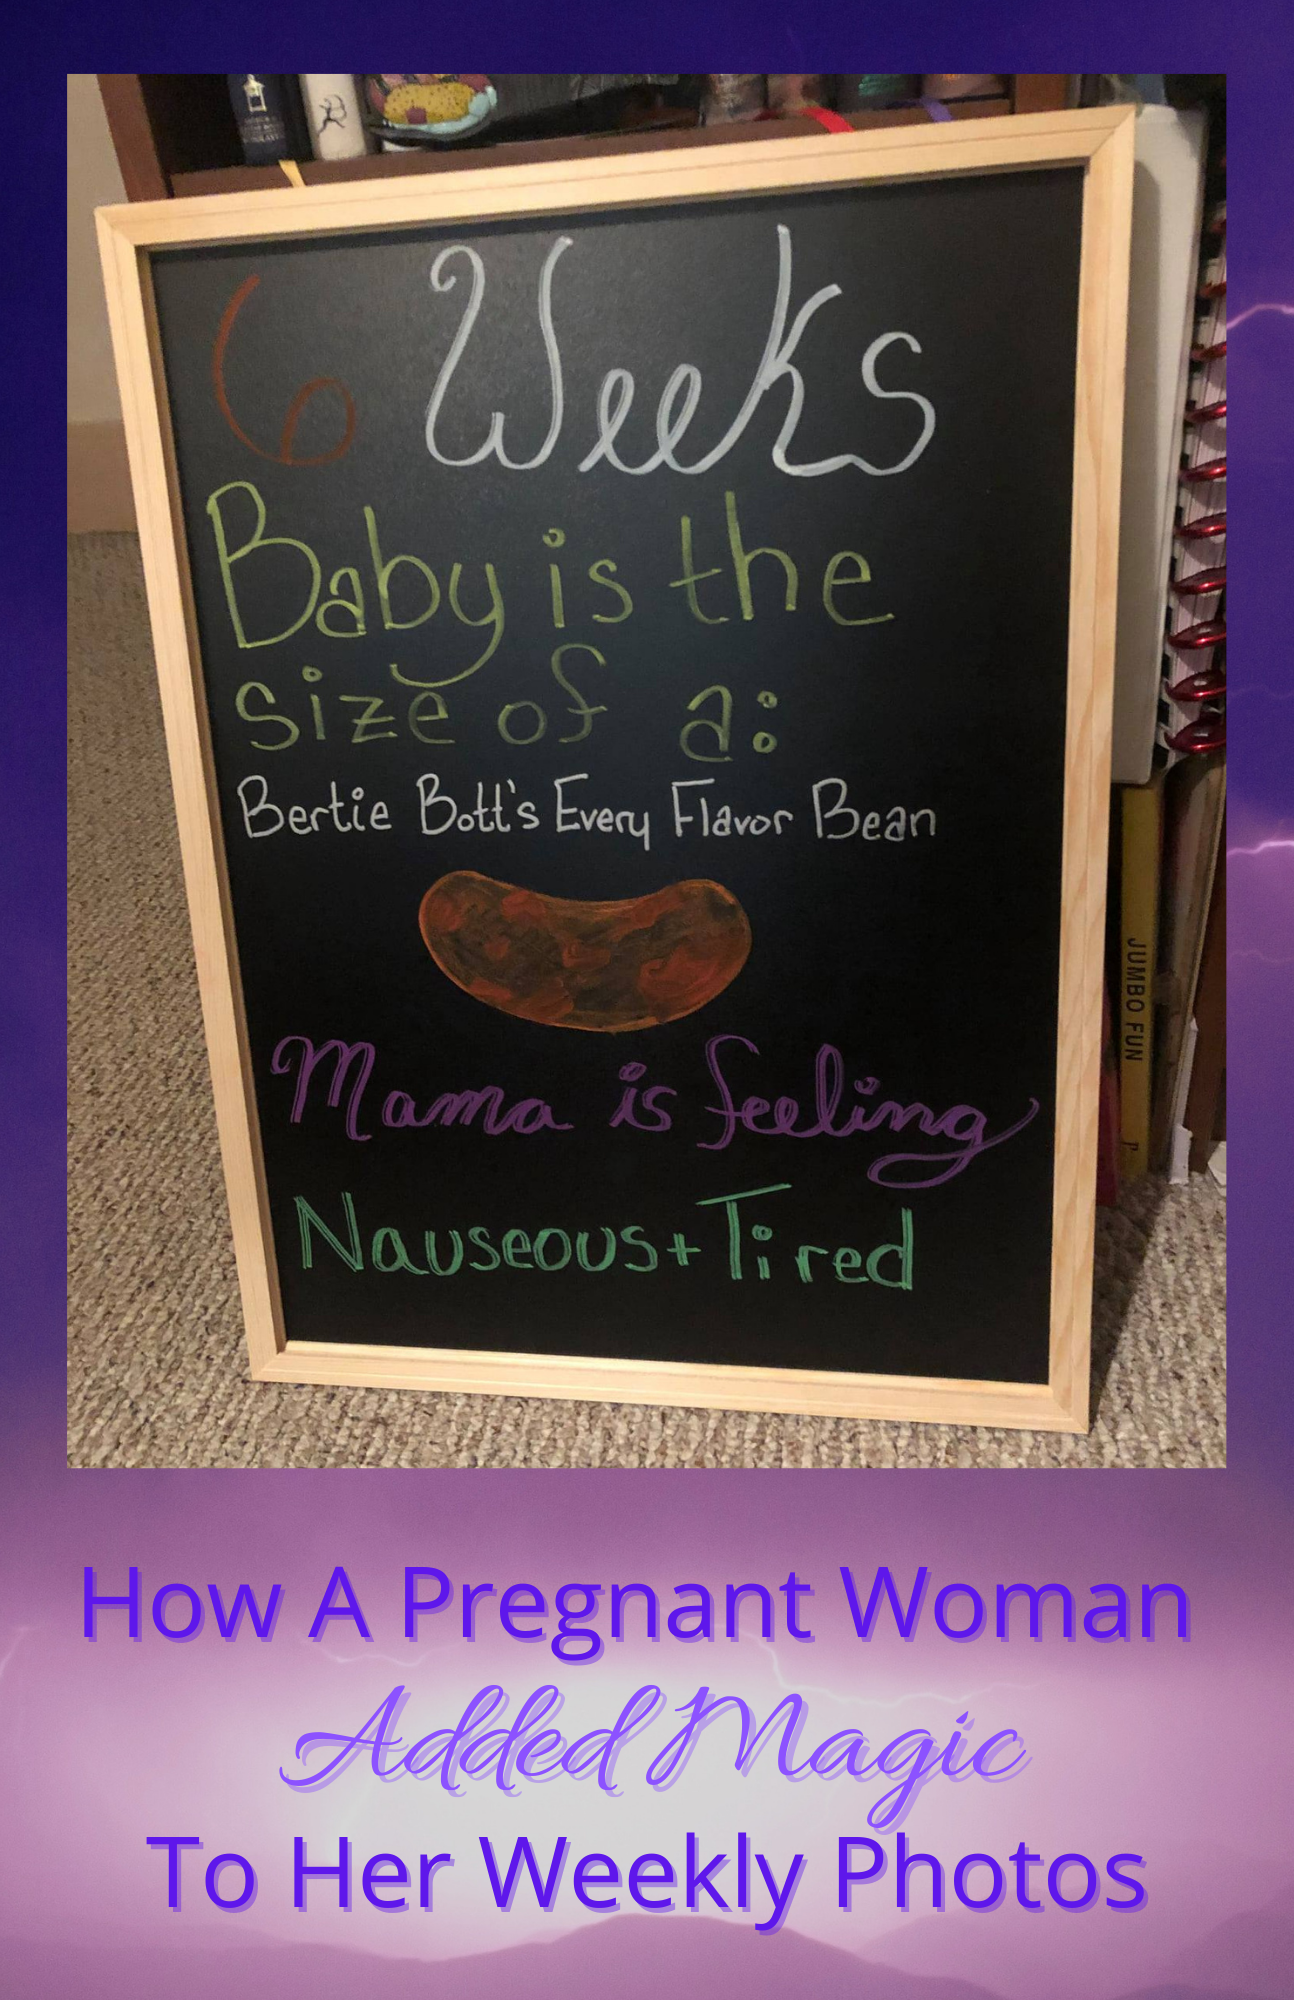 The sign created by a pregnant mom to show how big her baby was for each week of her pregnancy, using Harry Potter references.